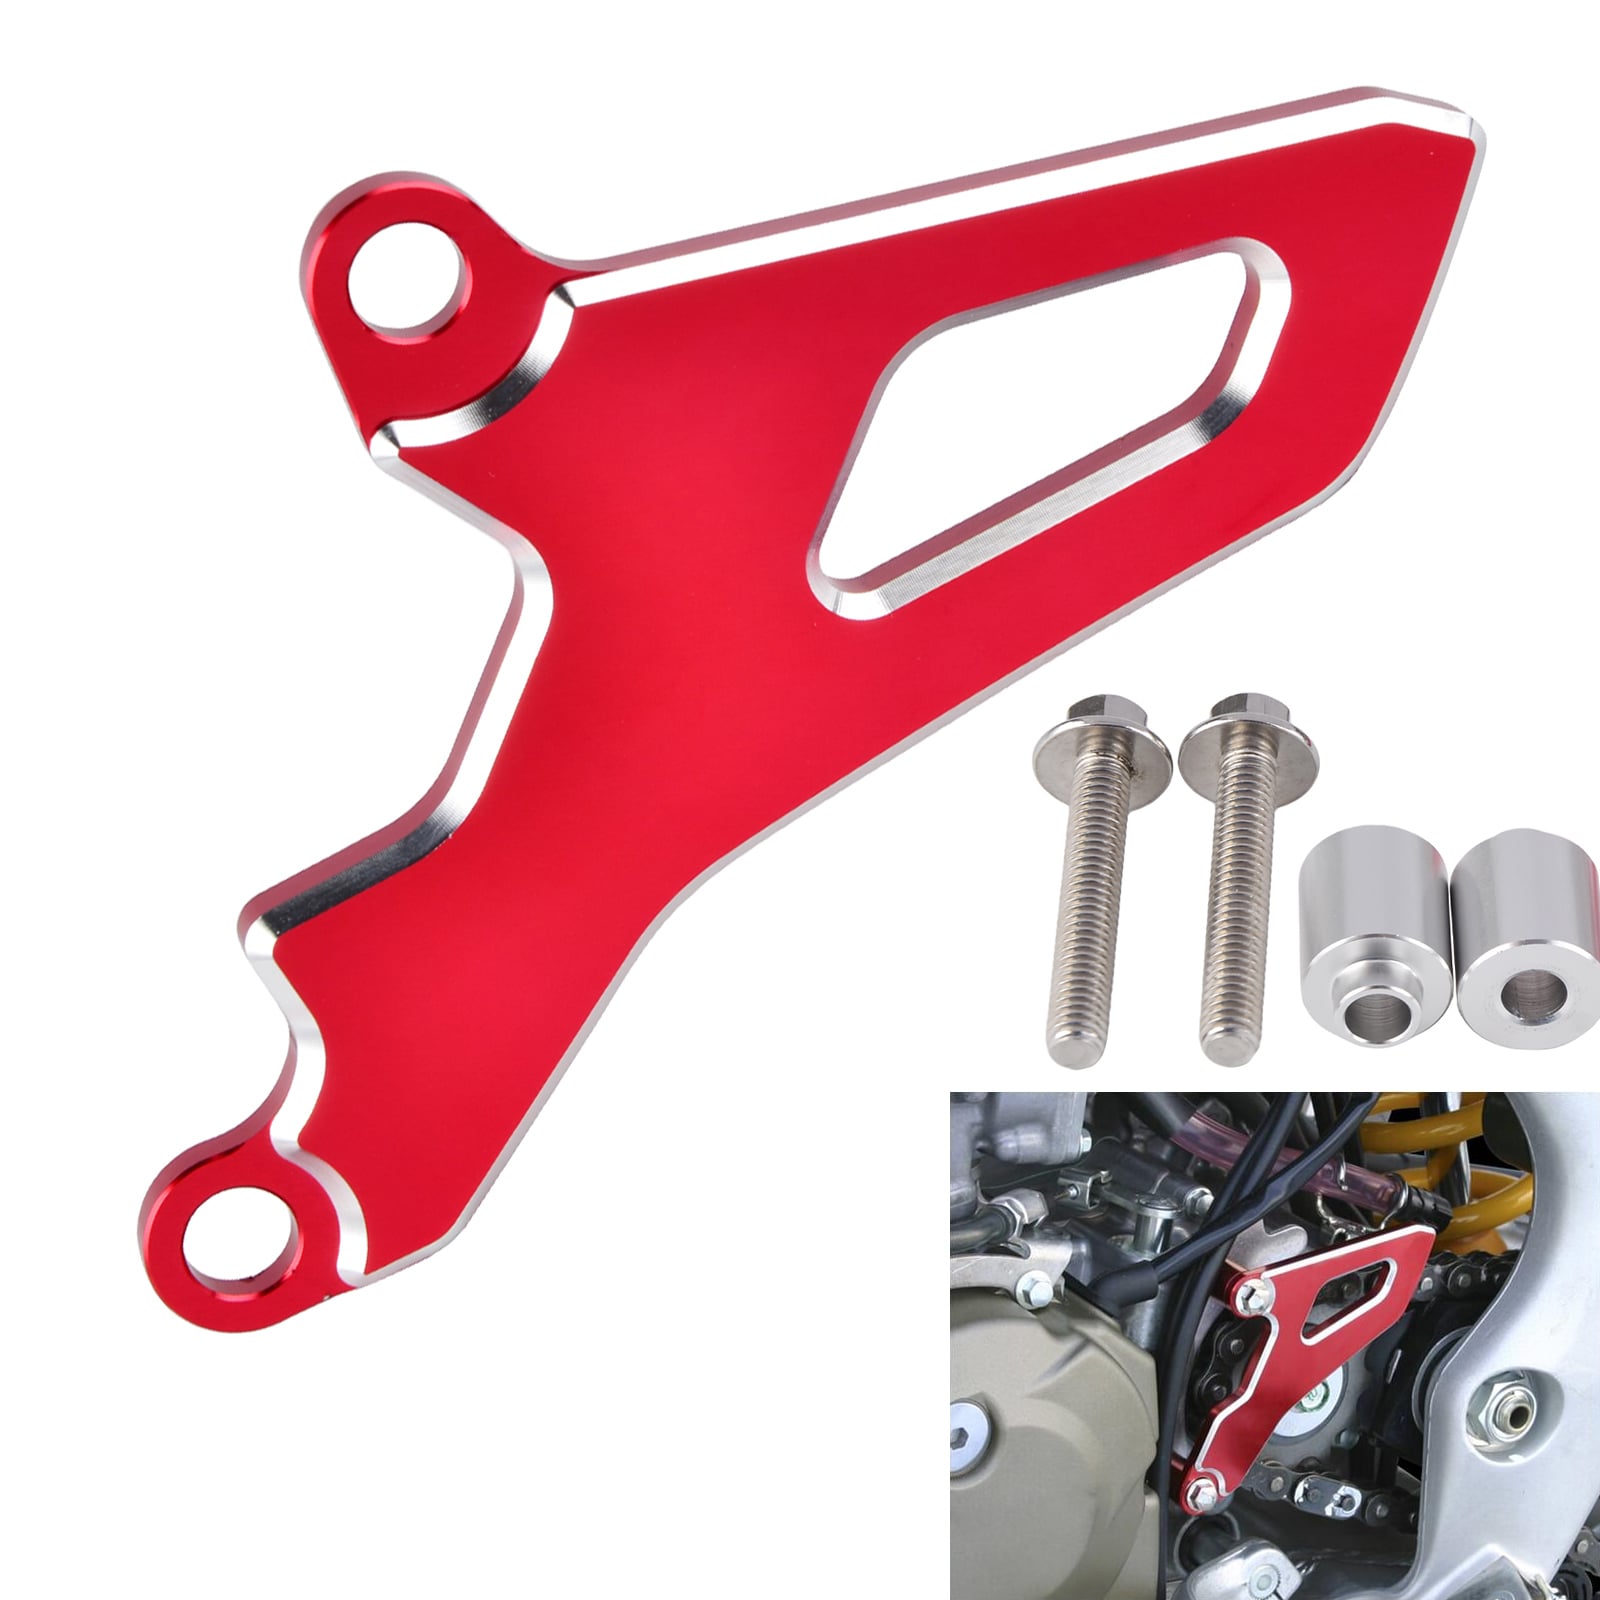 Front Sprocket Chain Cover Guard for Honda CRF150R/ CRF450R/X